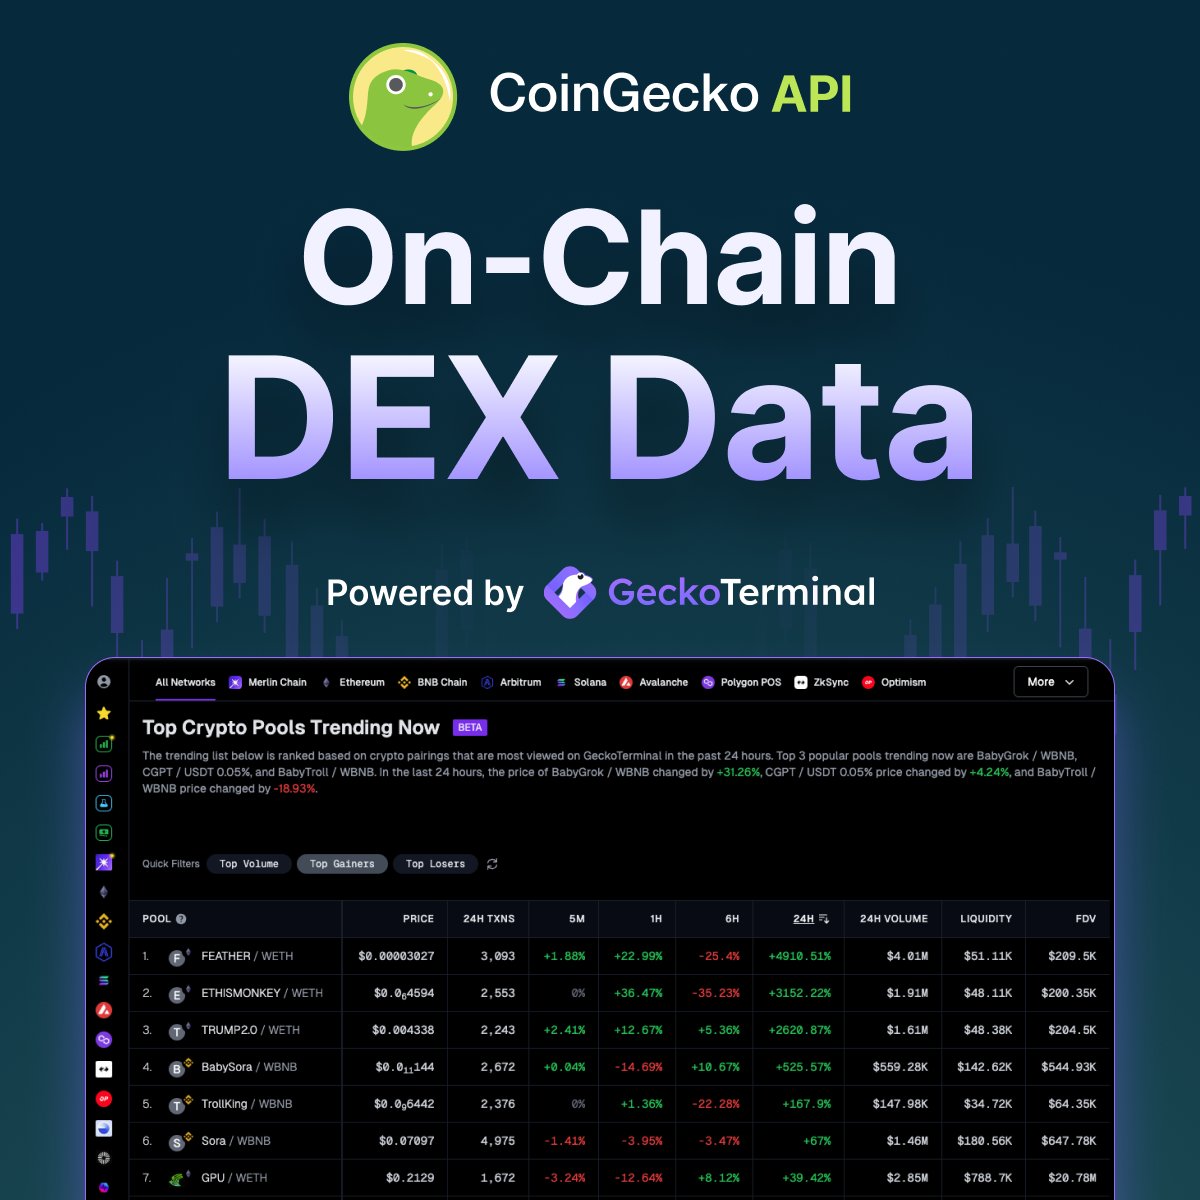 1/ GM Geckos, today's the day... 🚀🚀

On-chain DEX data is now directly accessible on CoinGecko API – powered by @GeckoTerminal.

Get on-chain token & liquidity pool data along with crypto price, market data, metadata and more from our API! Read on ⬇️

#BuildwithCoinGecko